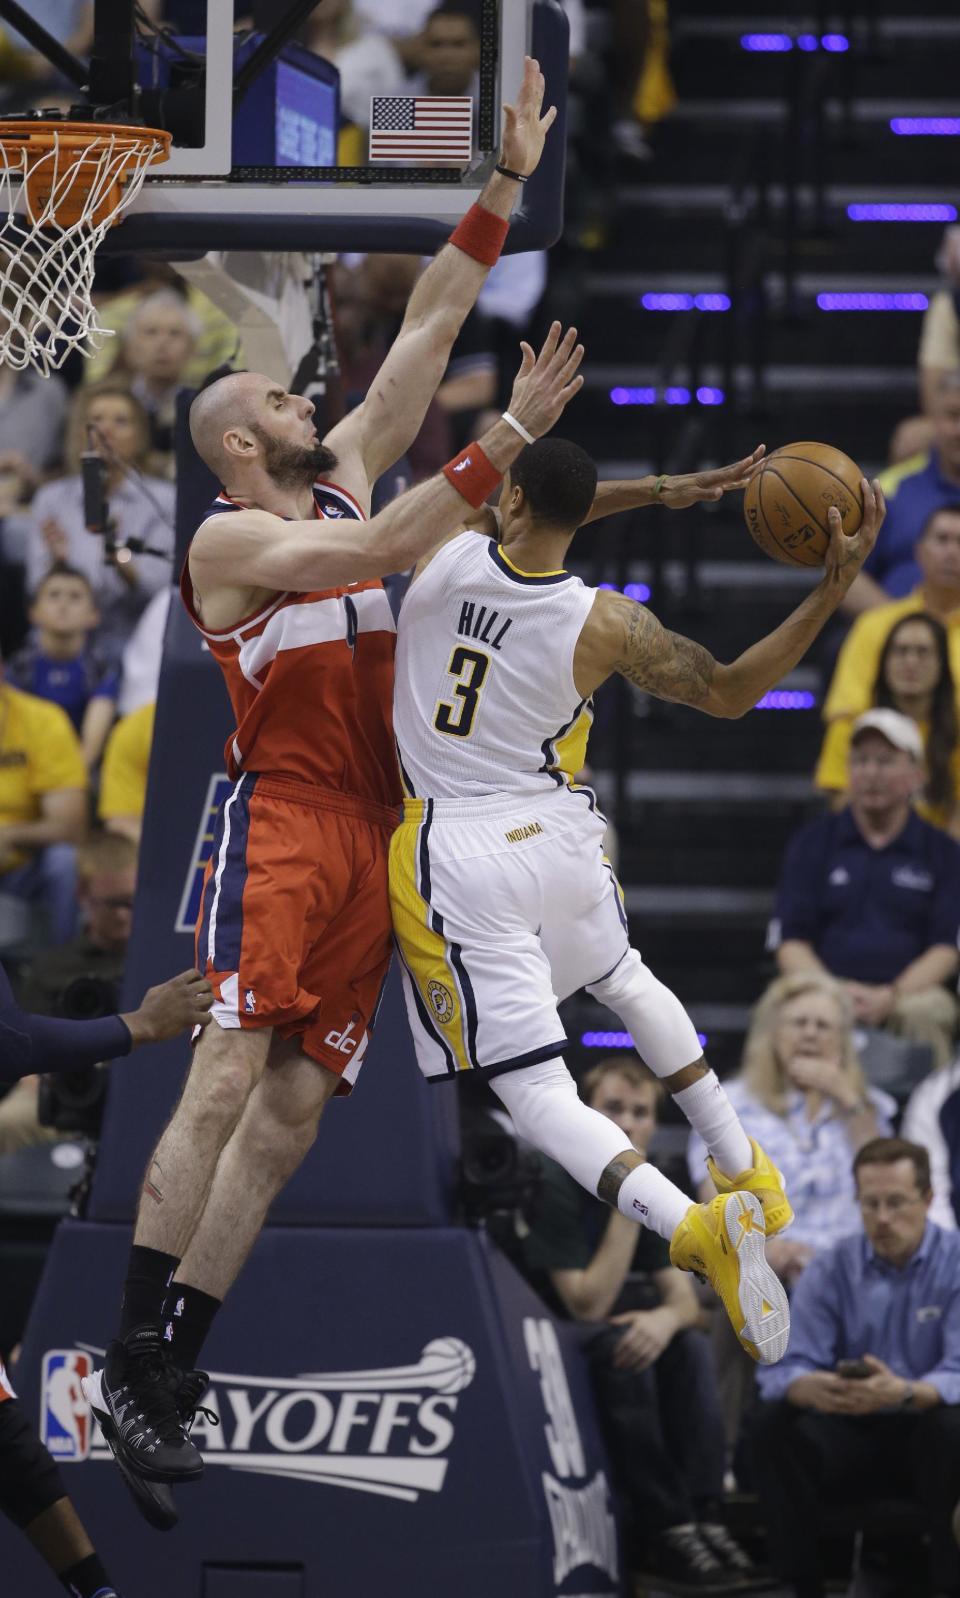 Washington Wizards center Marcin Gortat, left, goes up to block the shot of Indiana Pacers guard George Hill during the first half of game 5 of the Eastern Conference semifinal NBA basketball playoff series Tuesday, May 13, 2014, in Indianapolis. (AP Photo/Darron Cummings)